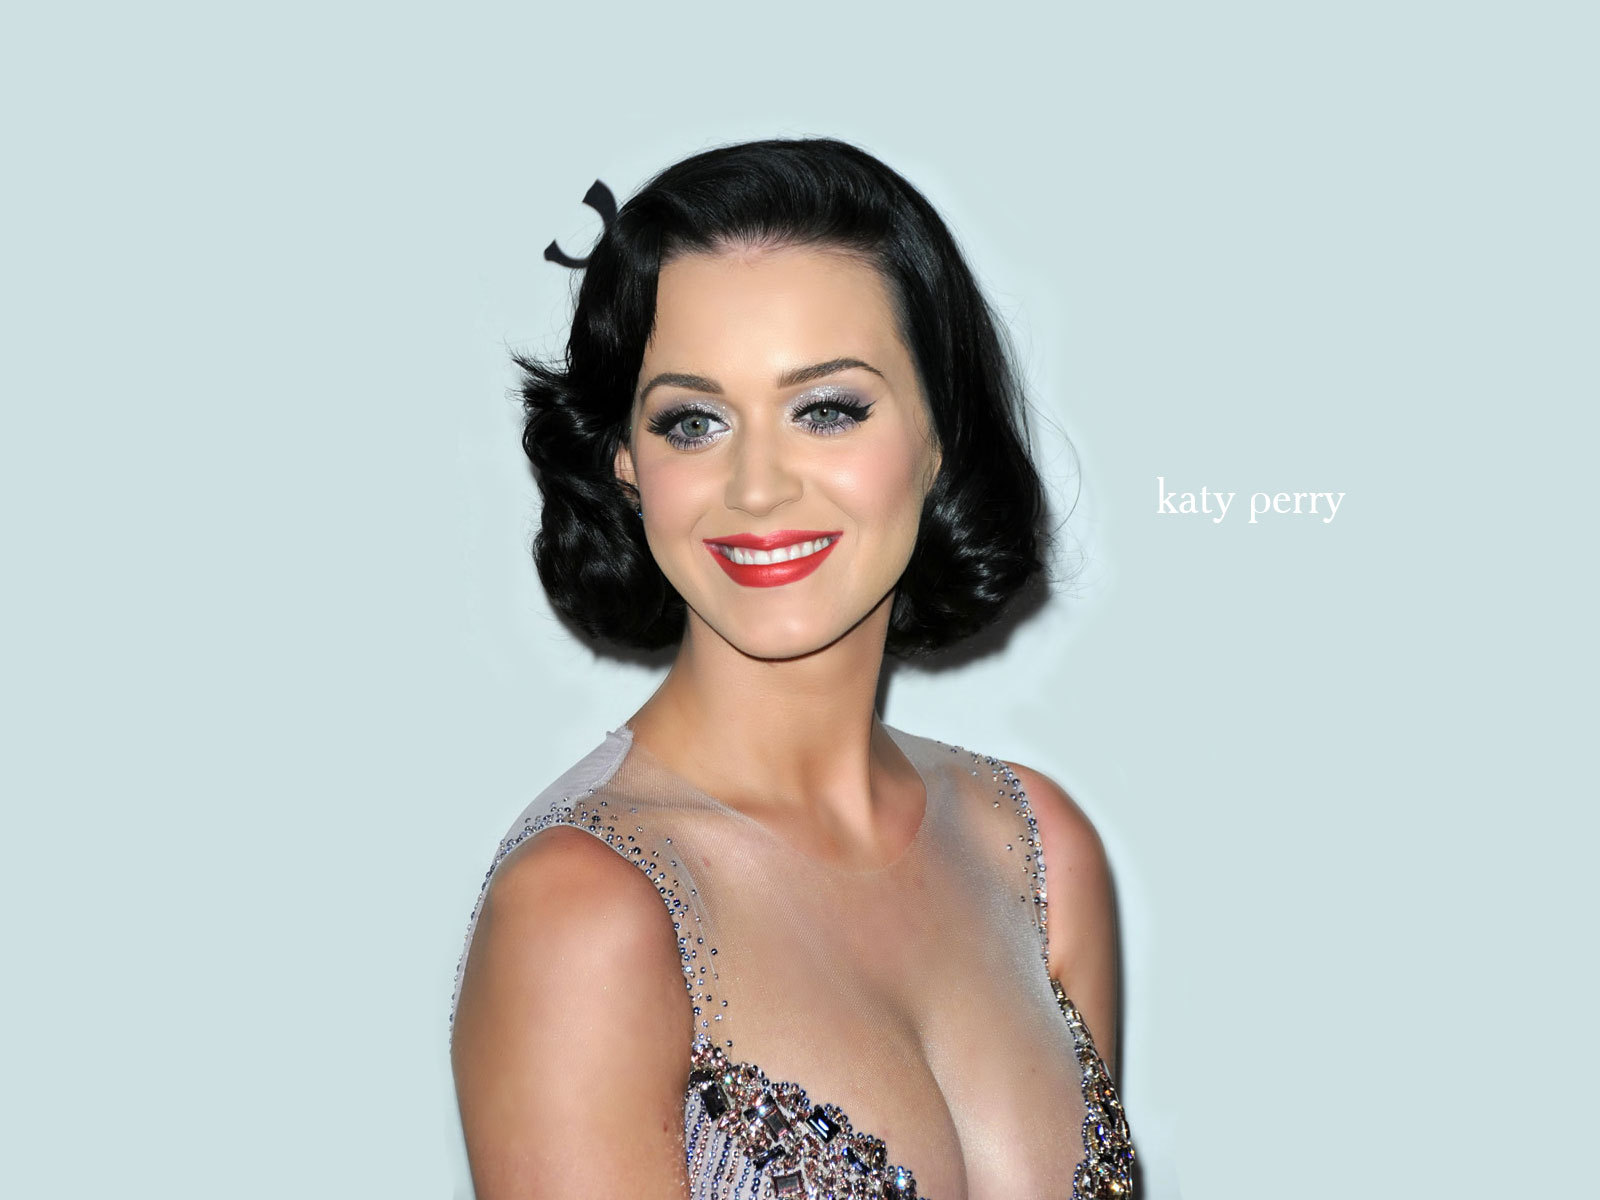 Katy Perry - Gallery